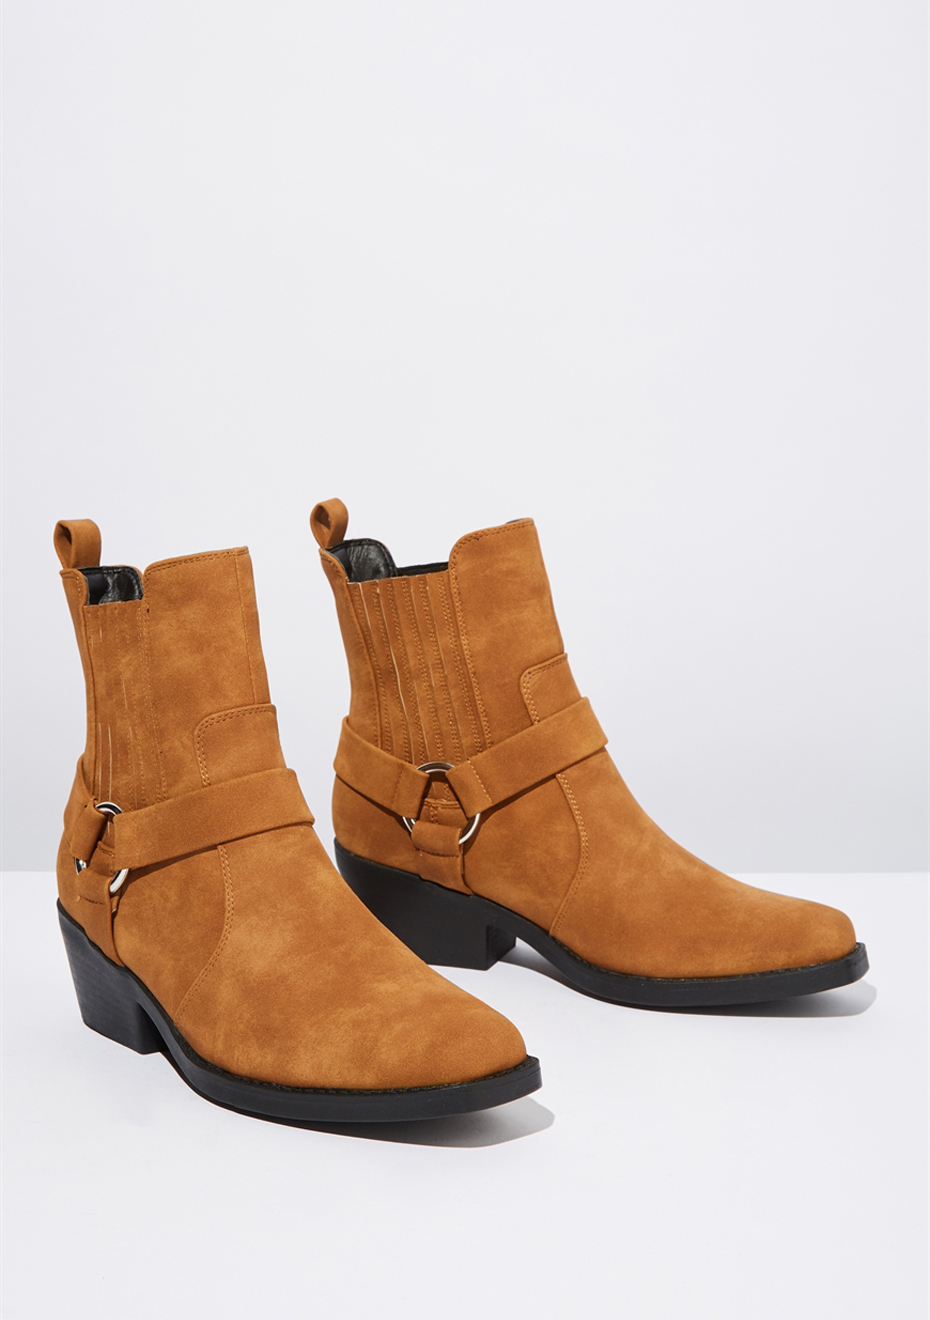 mens square toe boots under $1